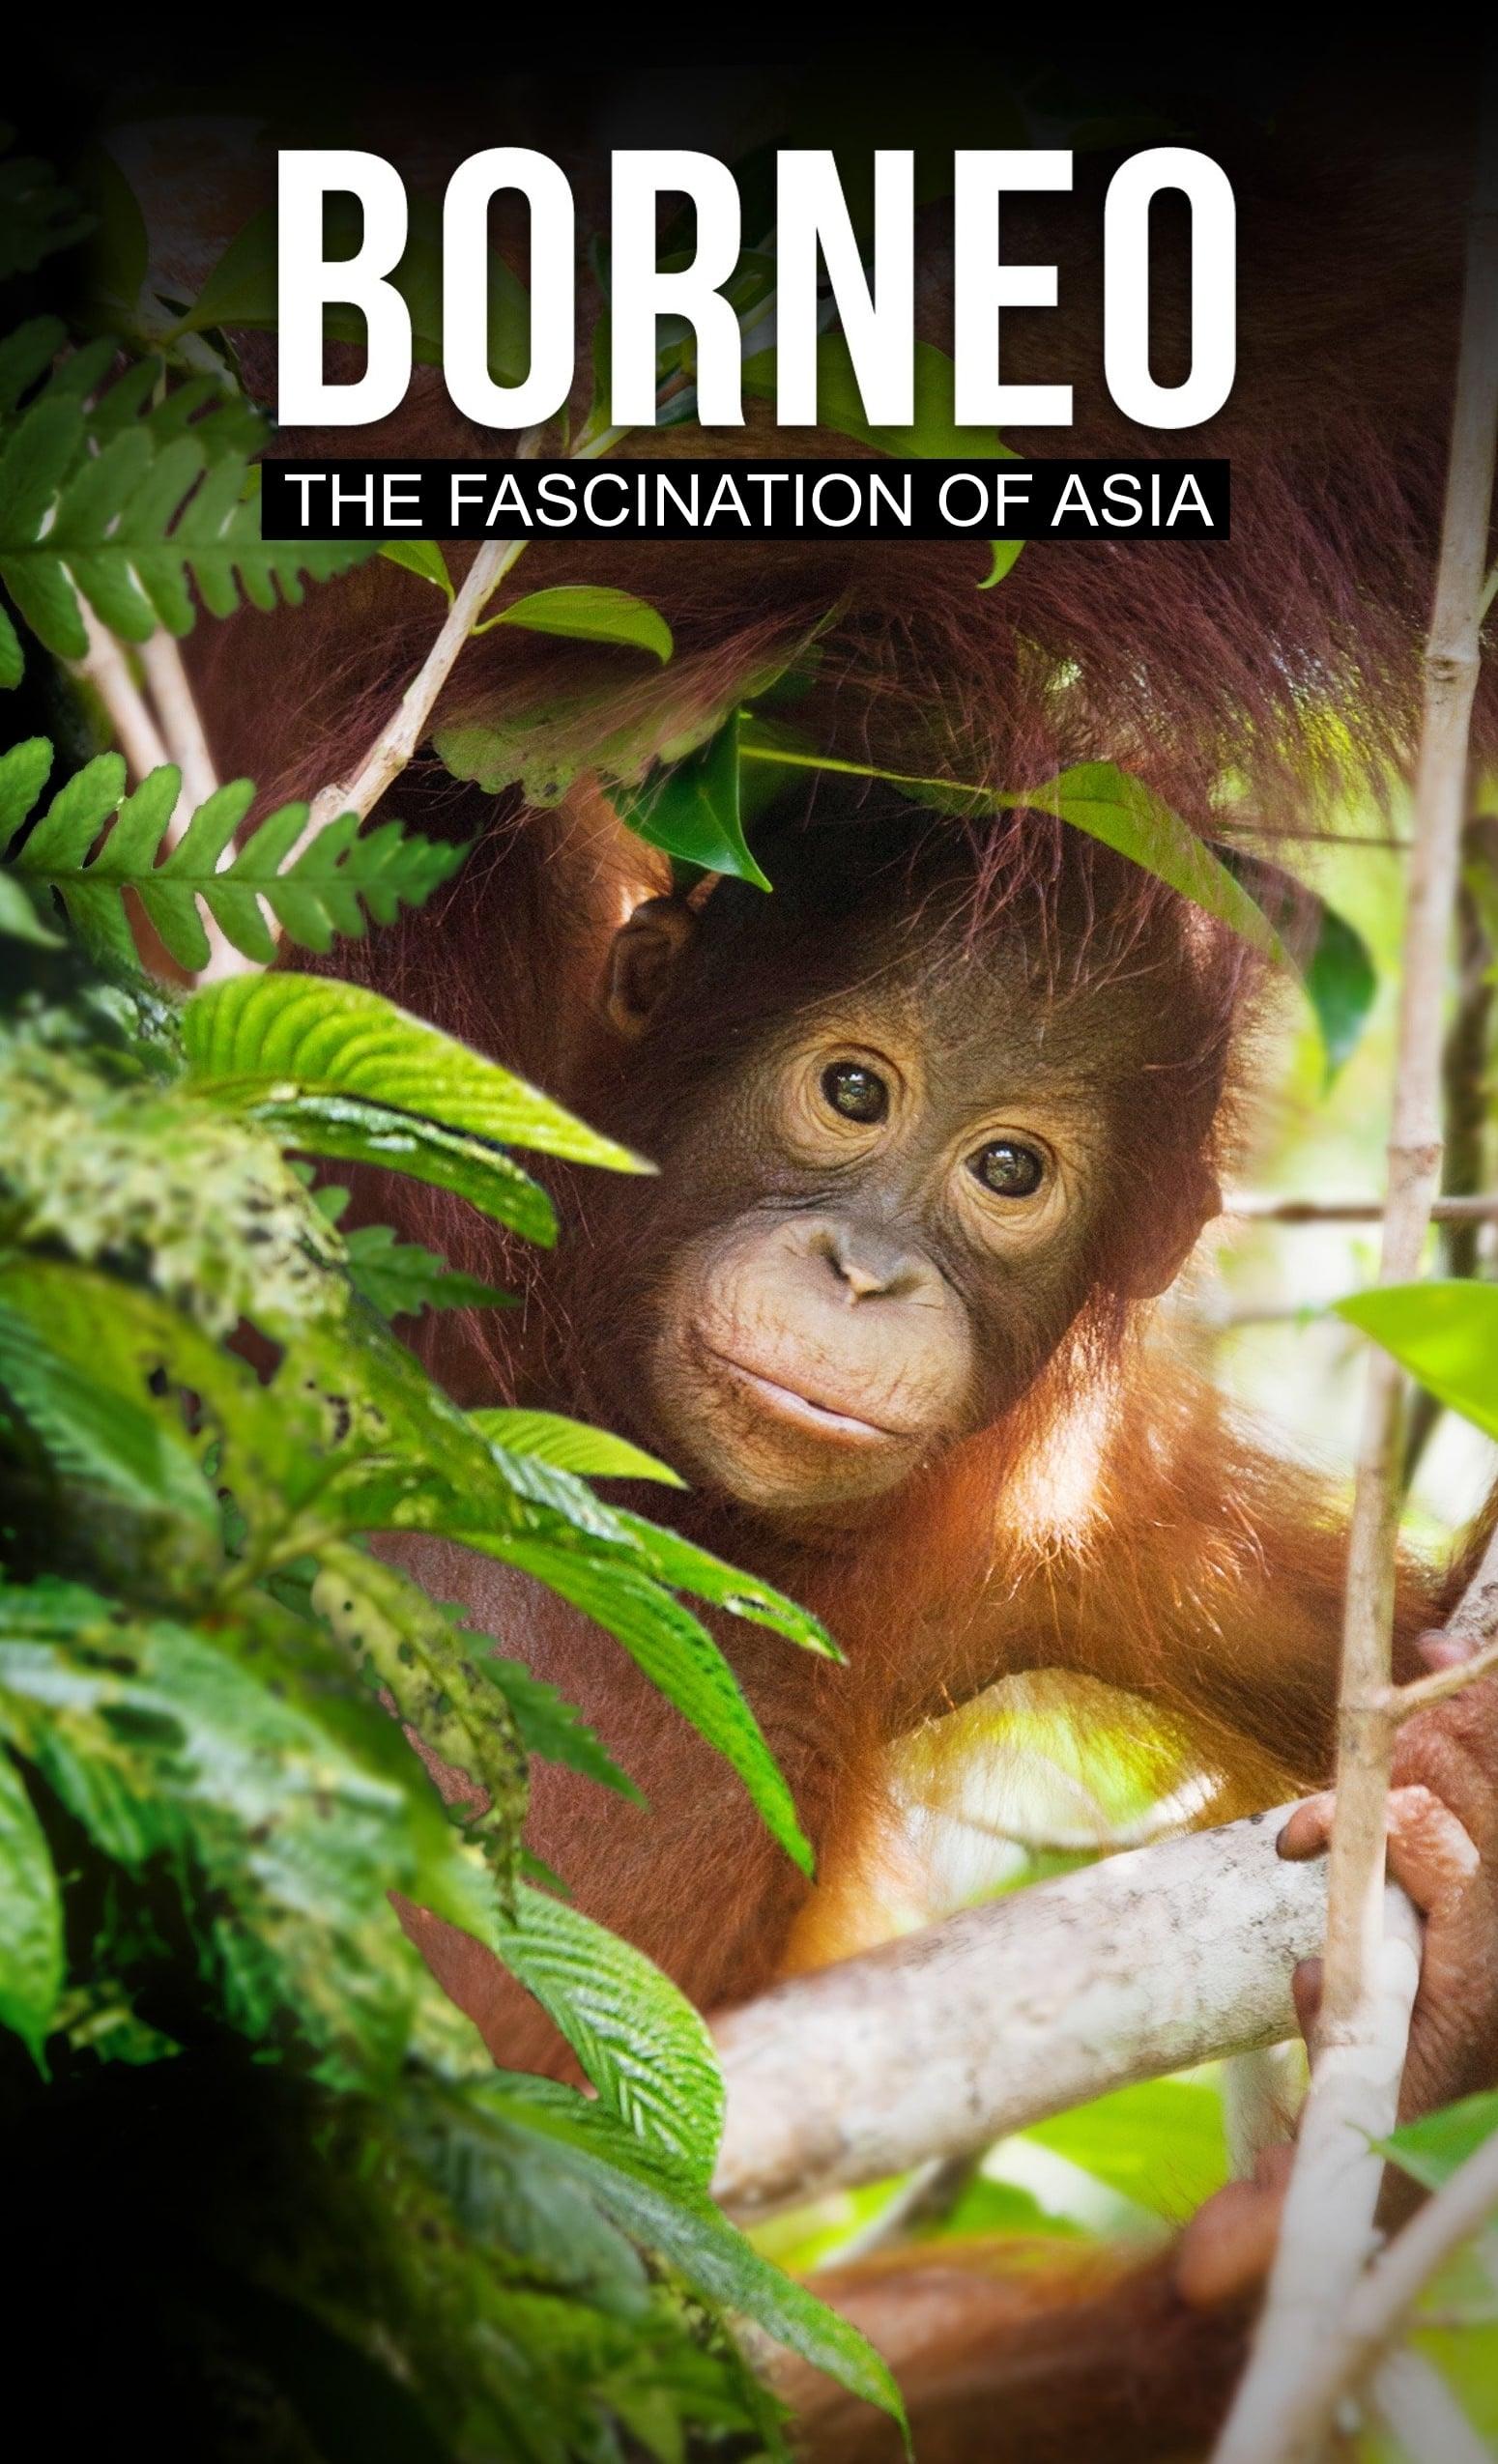 Borneo: The Fascination of Asia poster